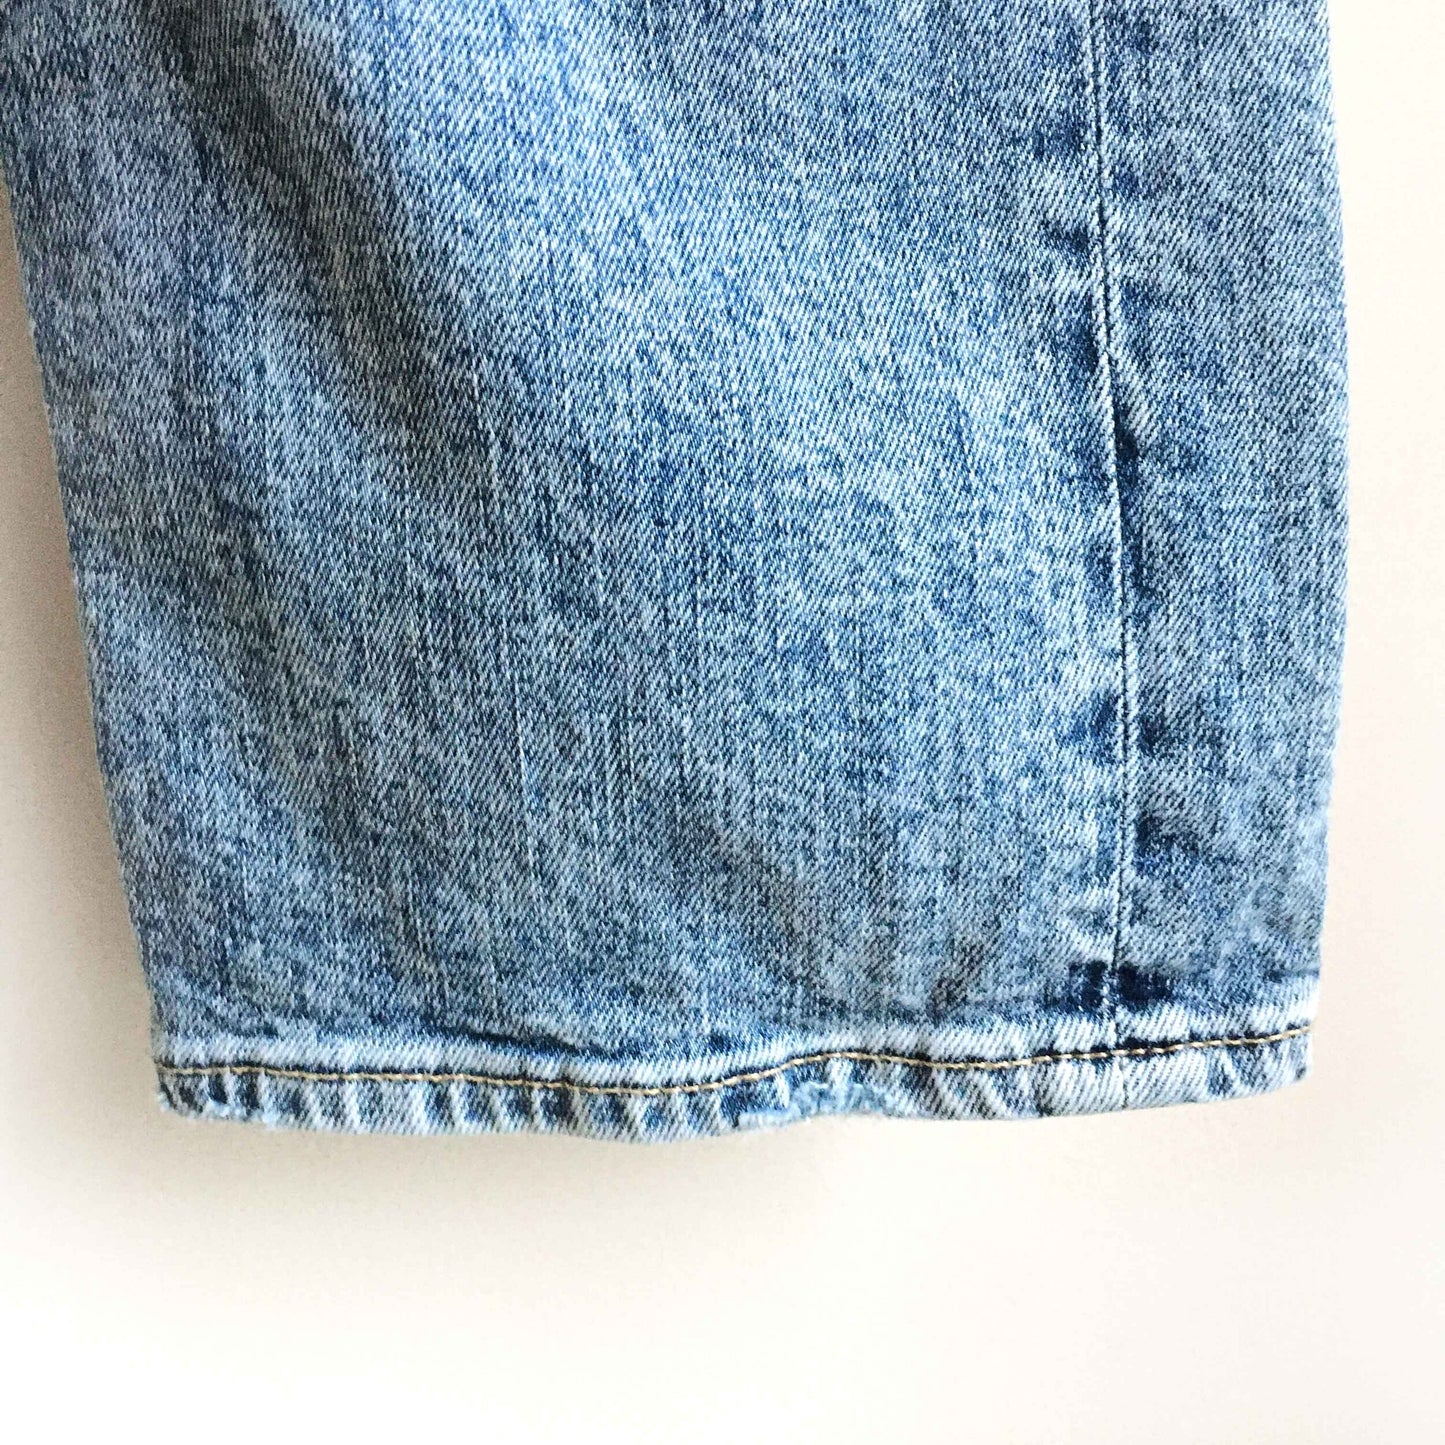 GAP high-rise cheeky straight jeans - size 31